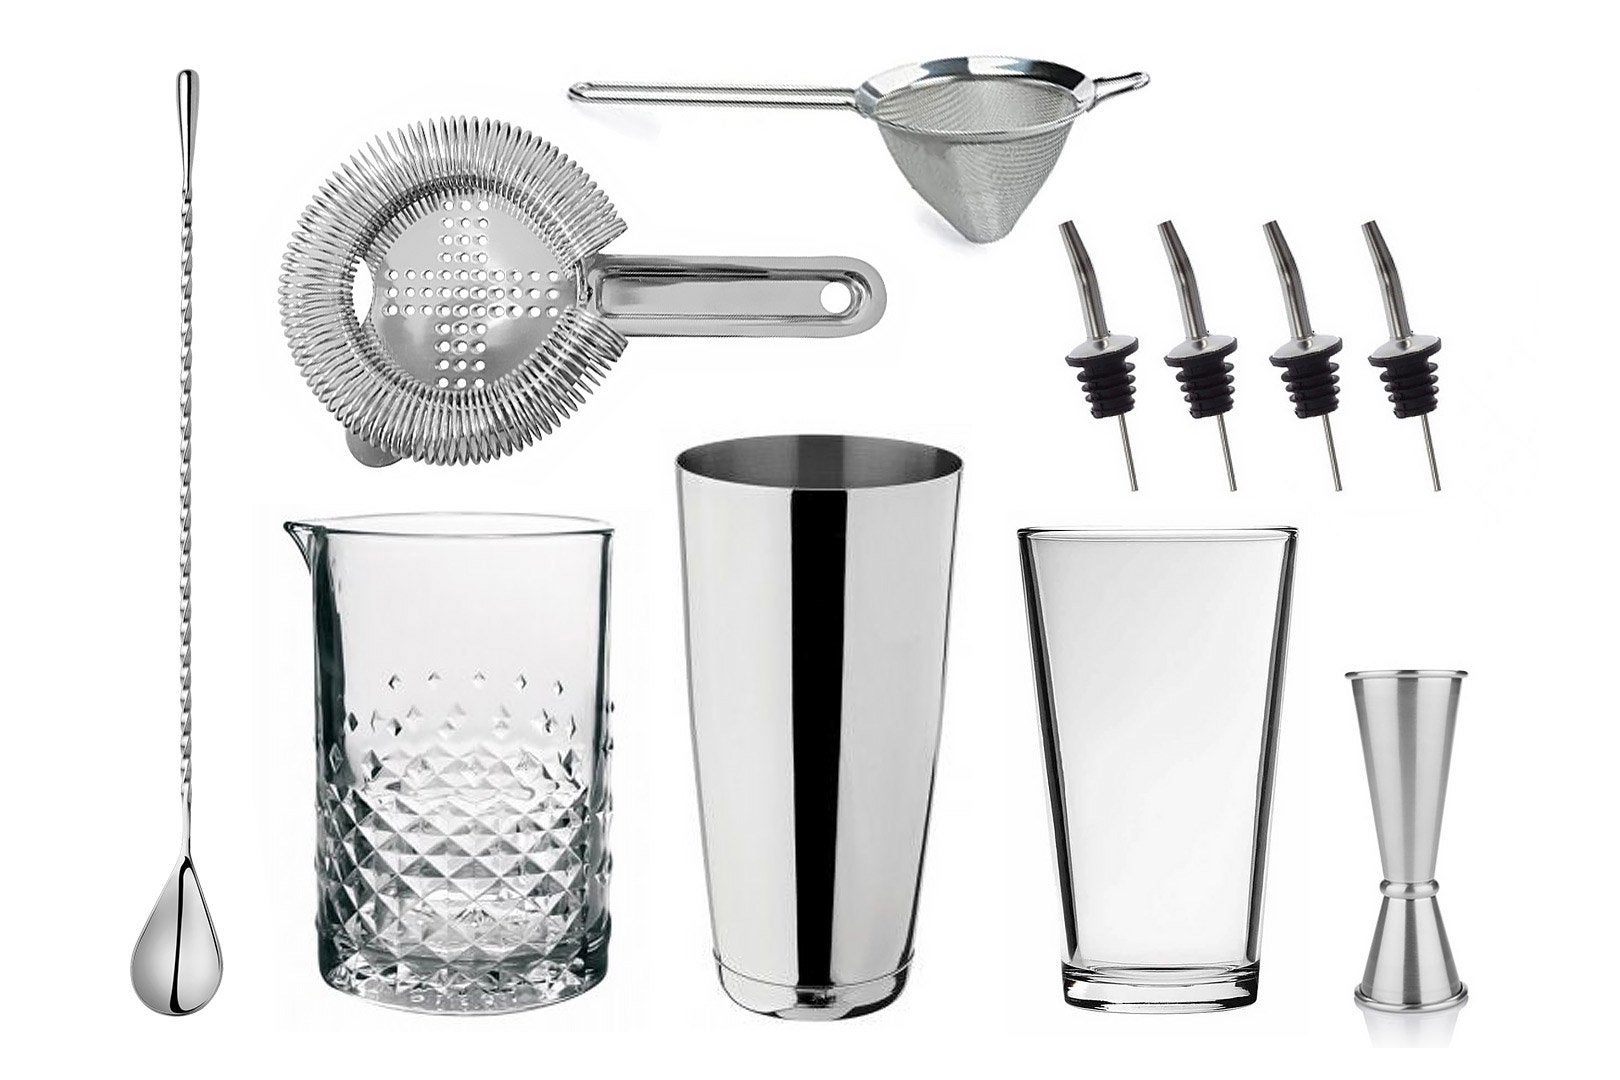 Bartender's Bar Kit with Boston Shaker and Glass